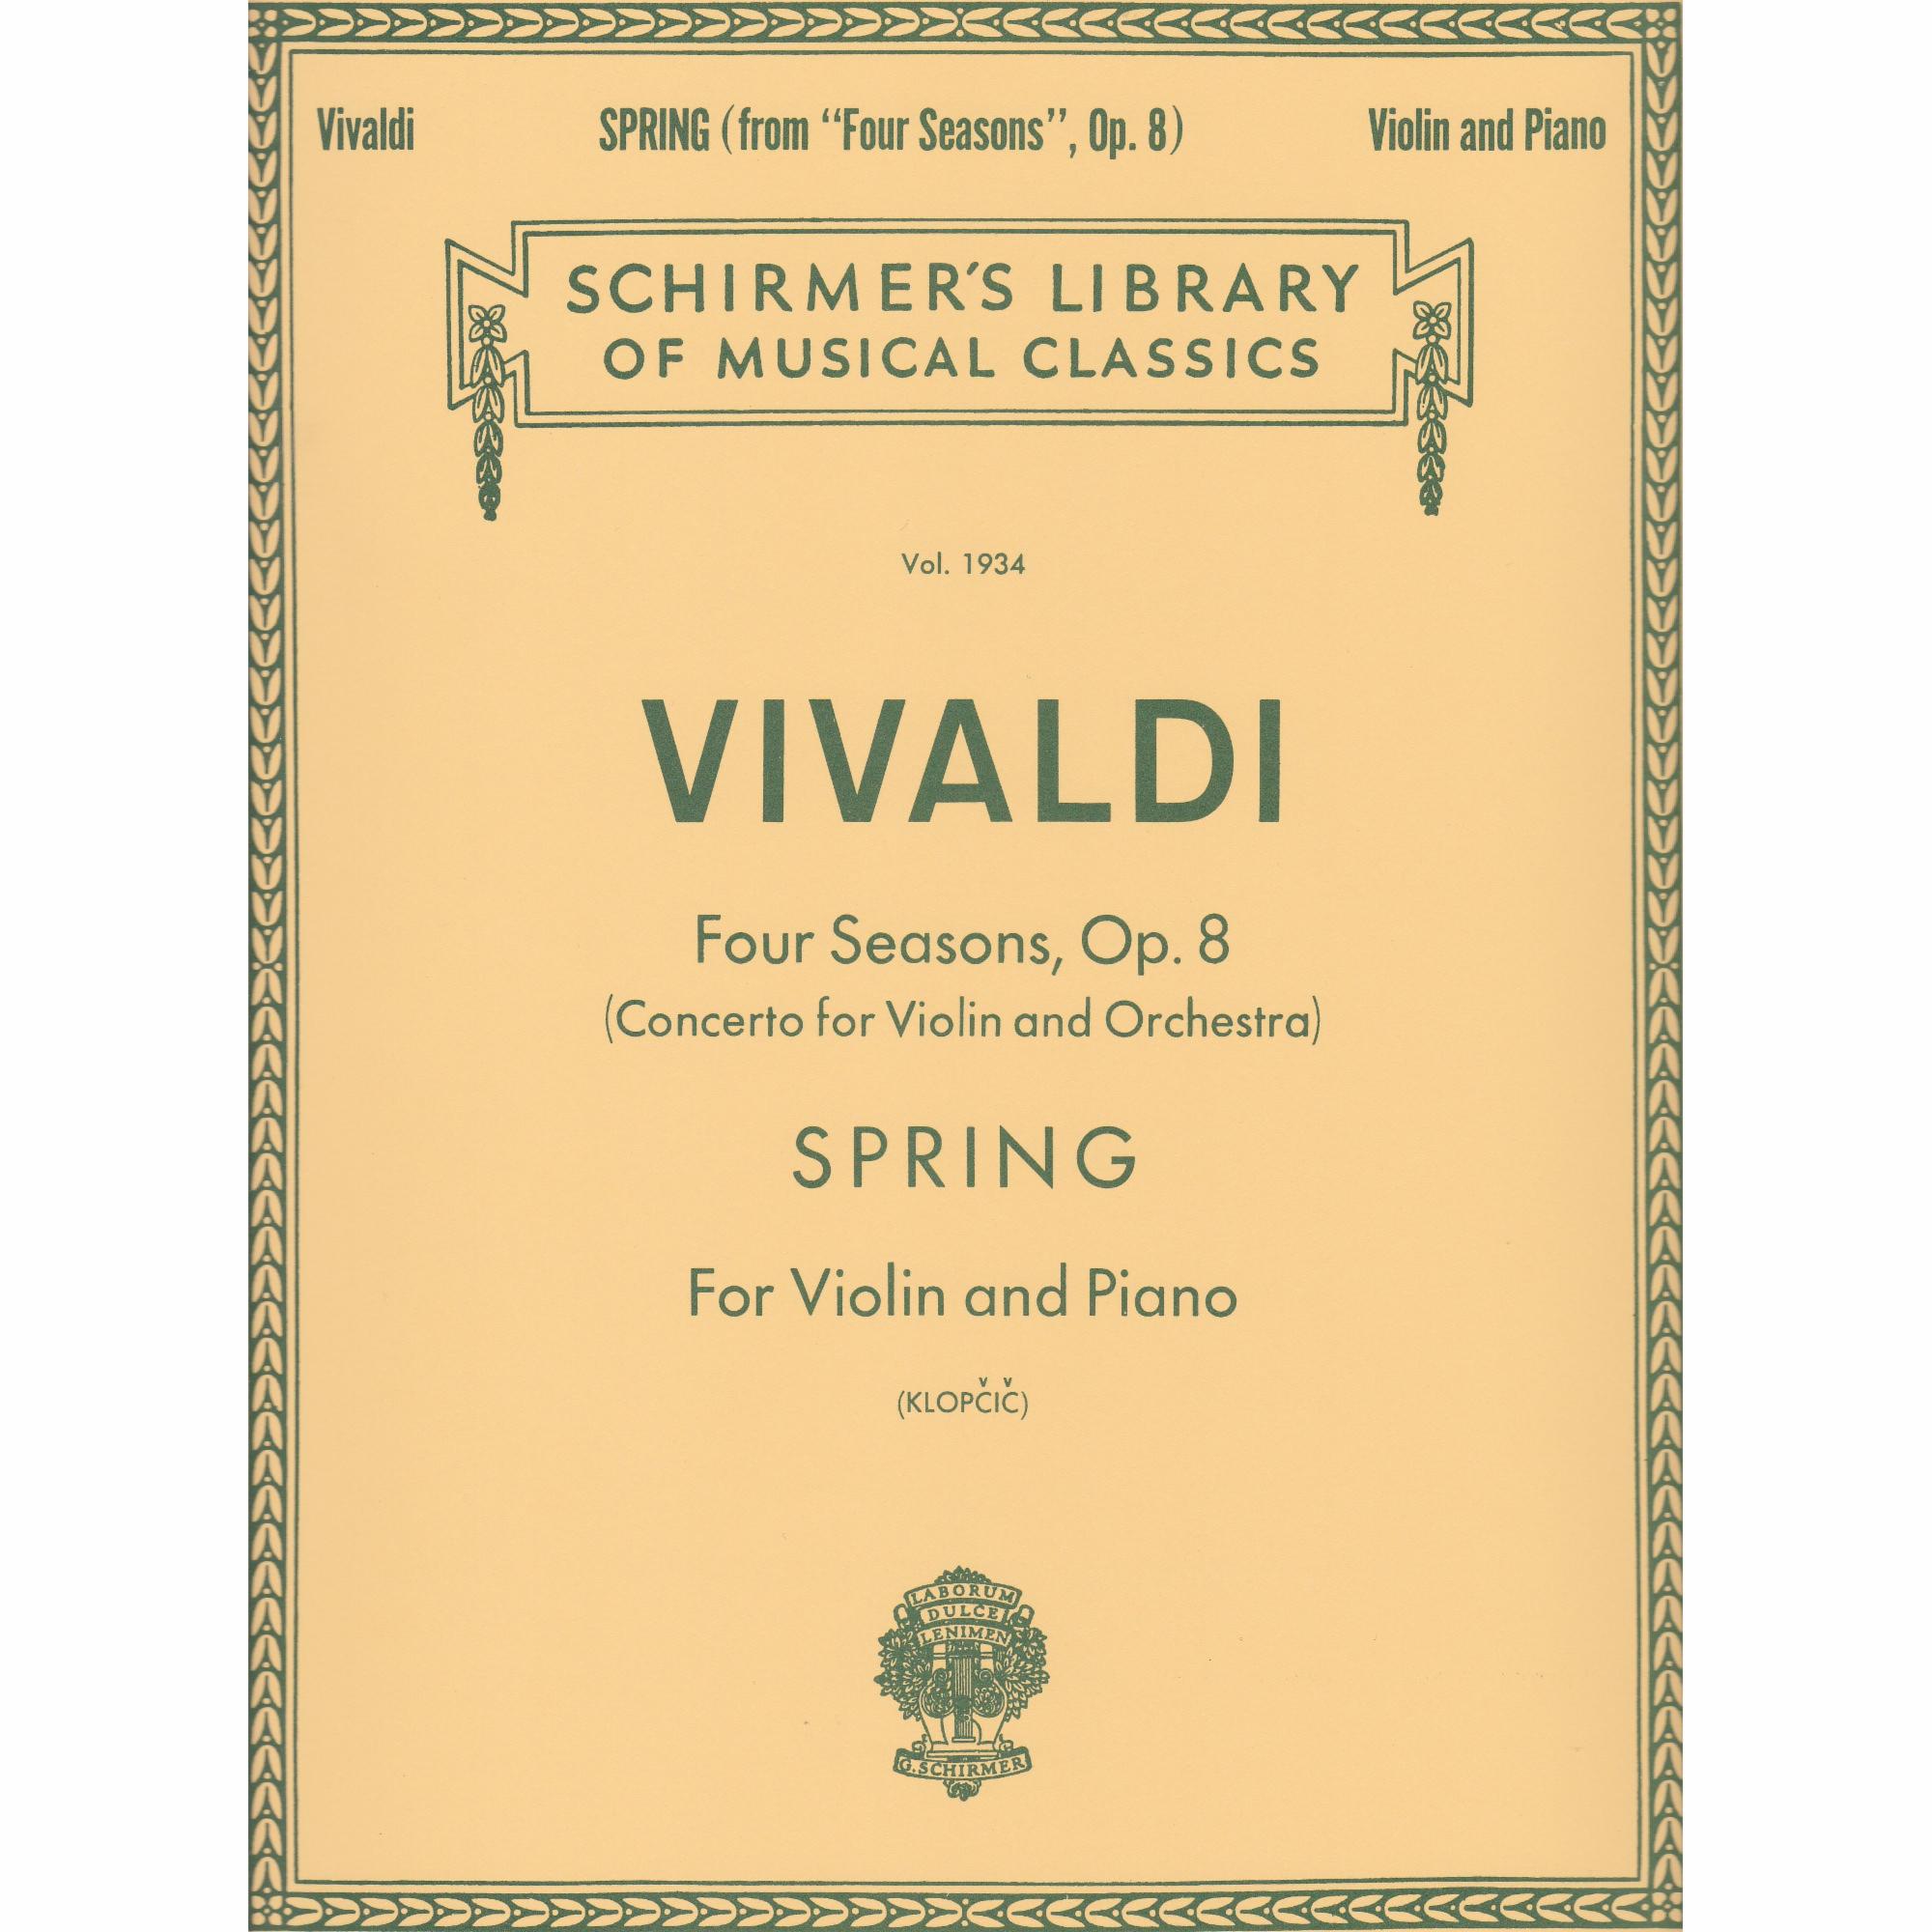 Spring, from The Four Seasons